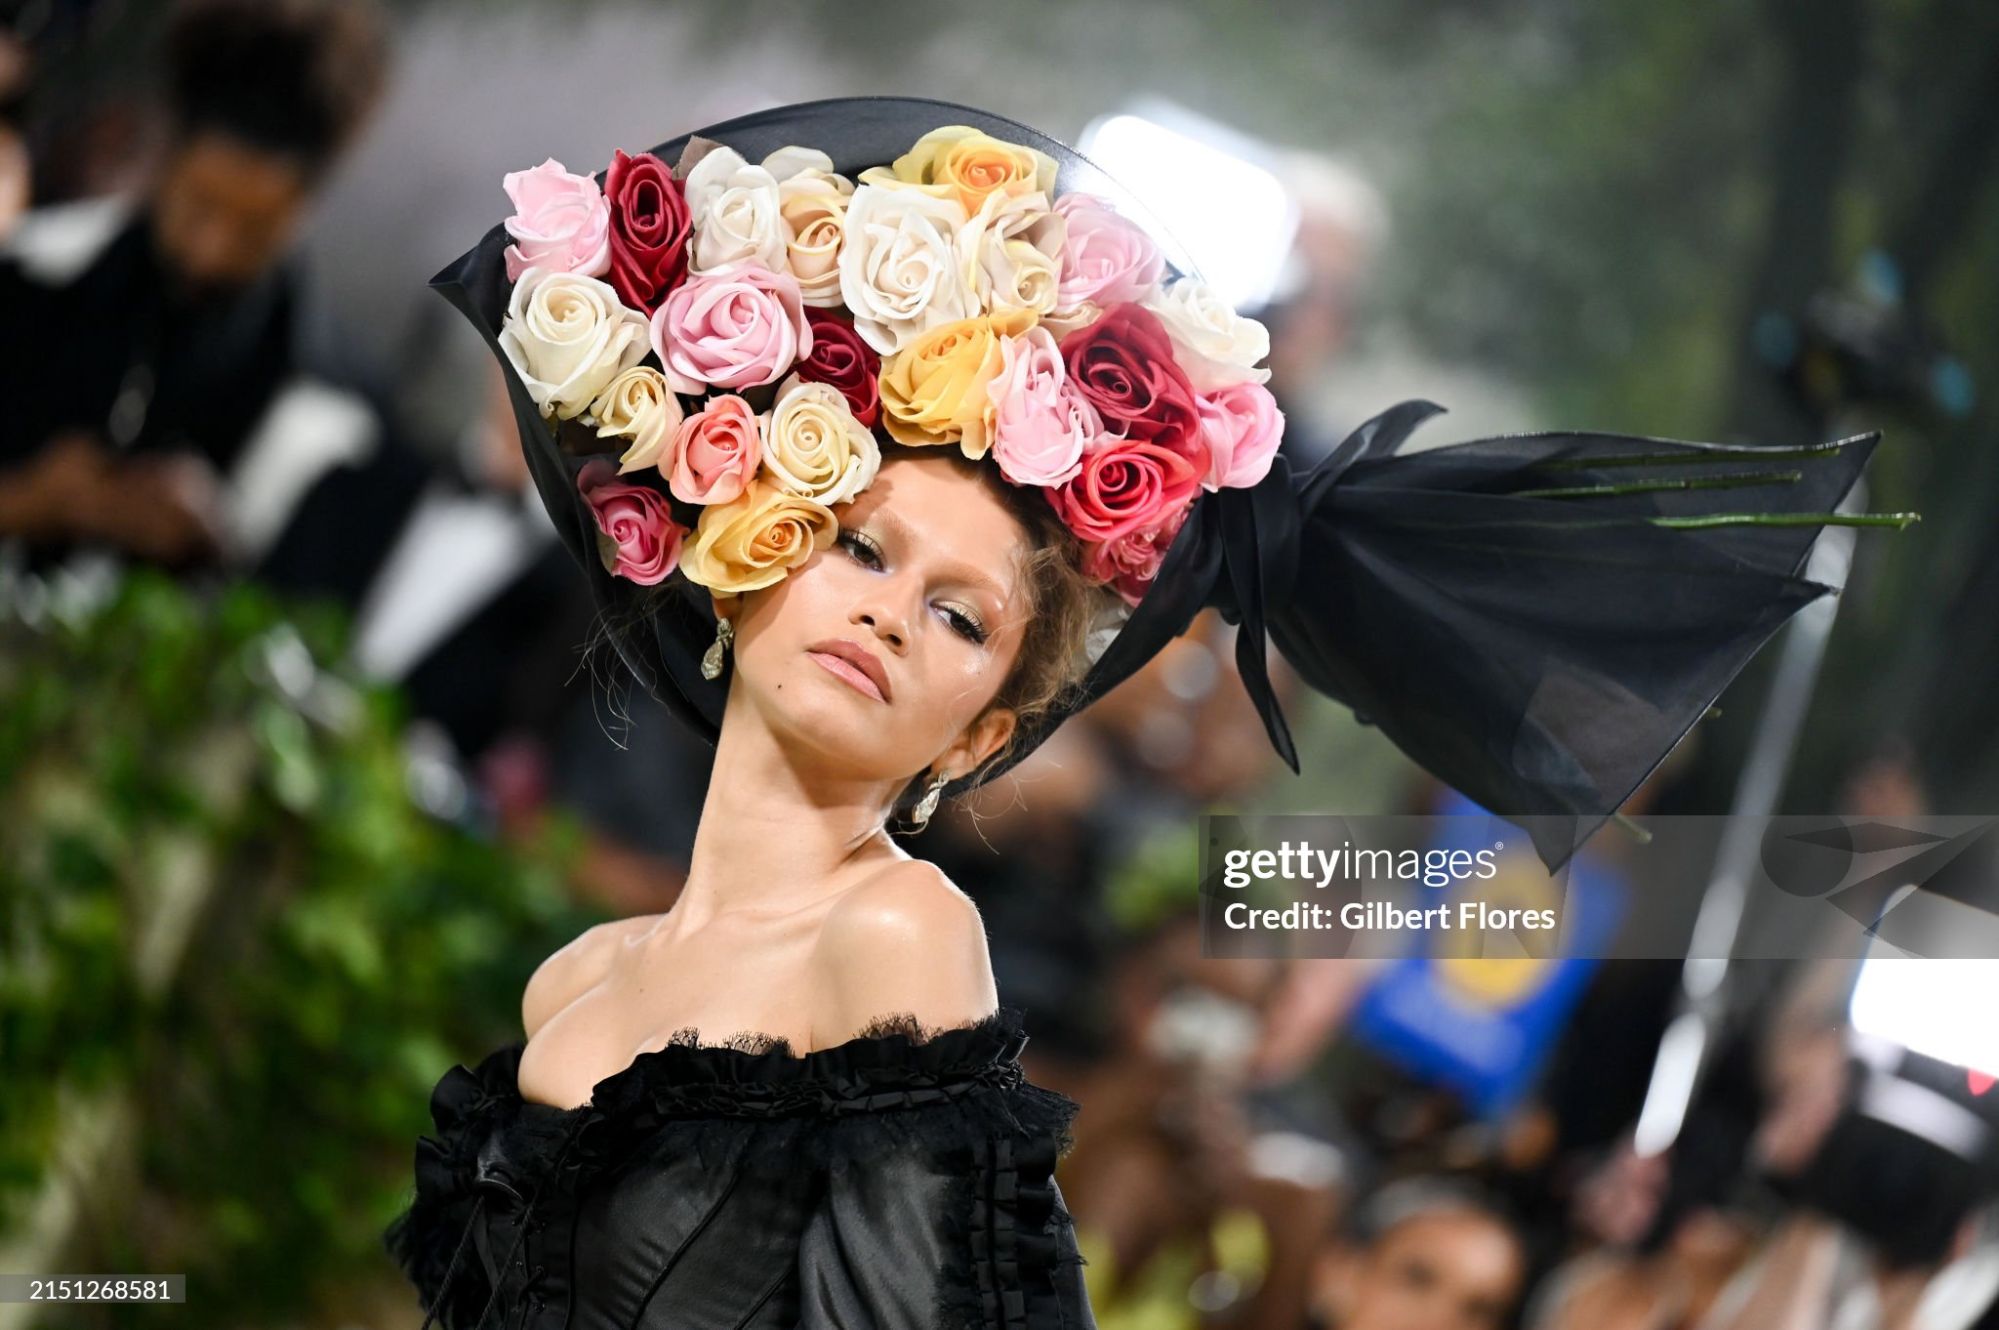 gettyimages-2151268581-2048x2048.jpg